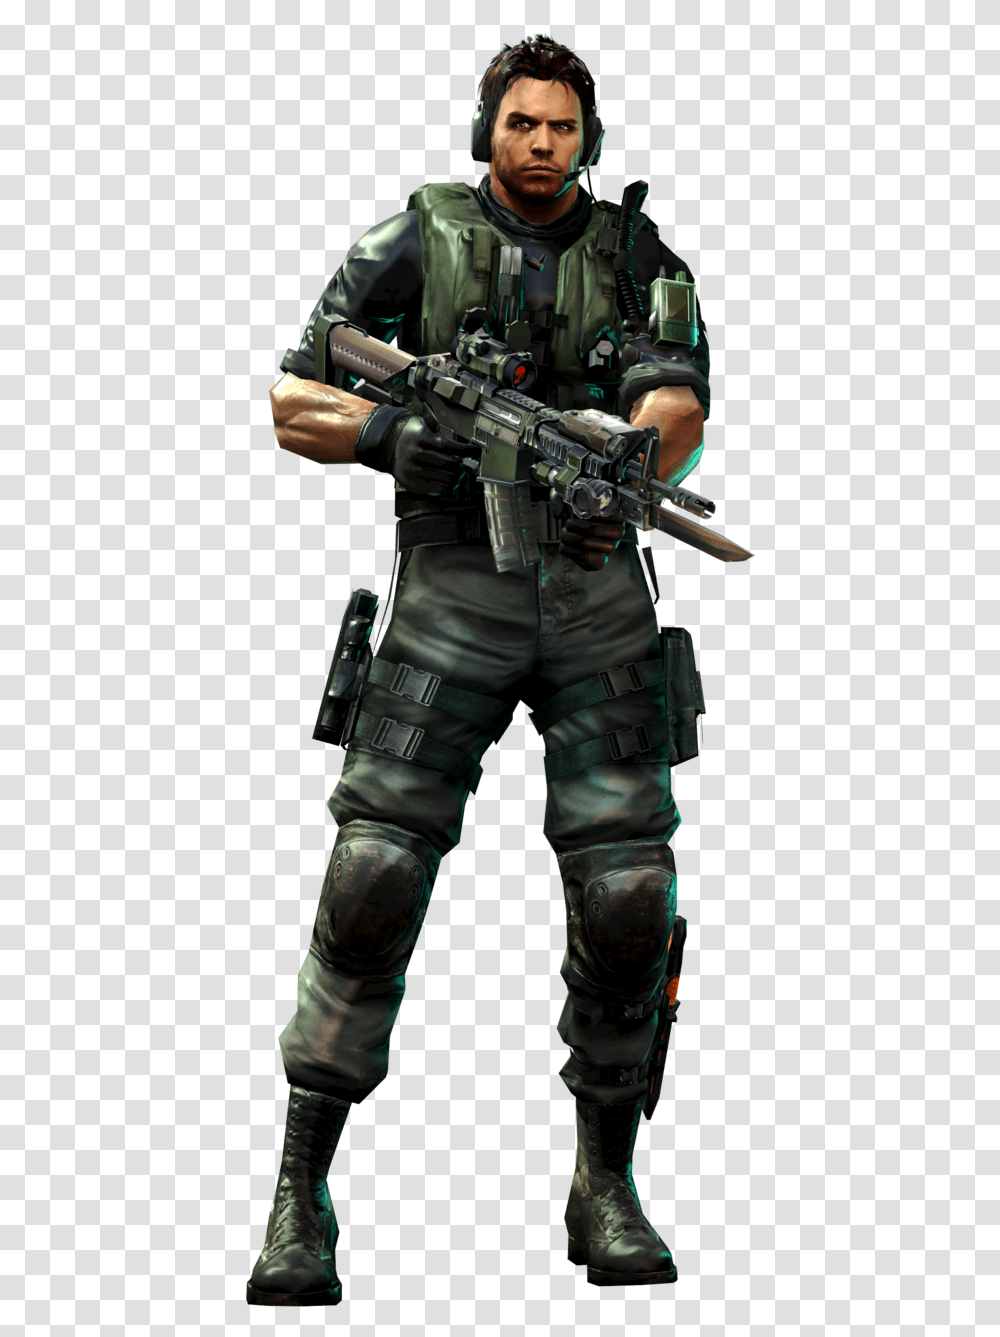 The 25 Best Summer Blockbusters Of All Time Chris Redfield Resident Evil Revelations, Person, Human, Gun, Weapon Transparent Png